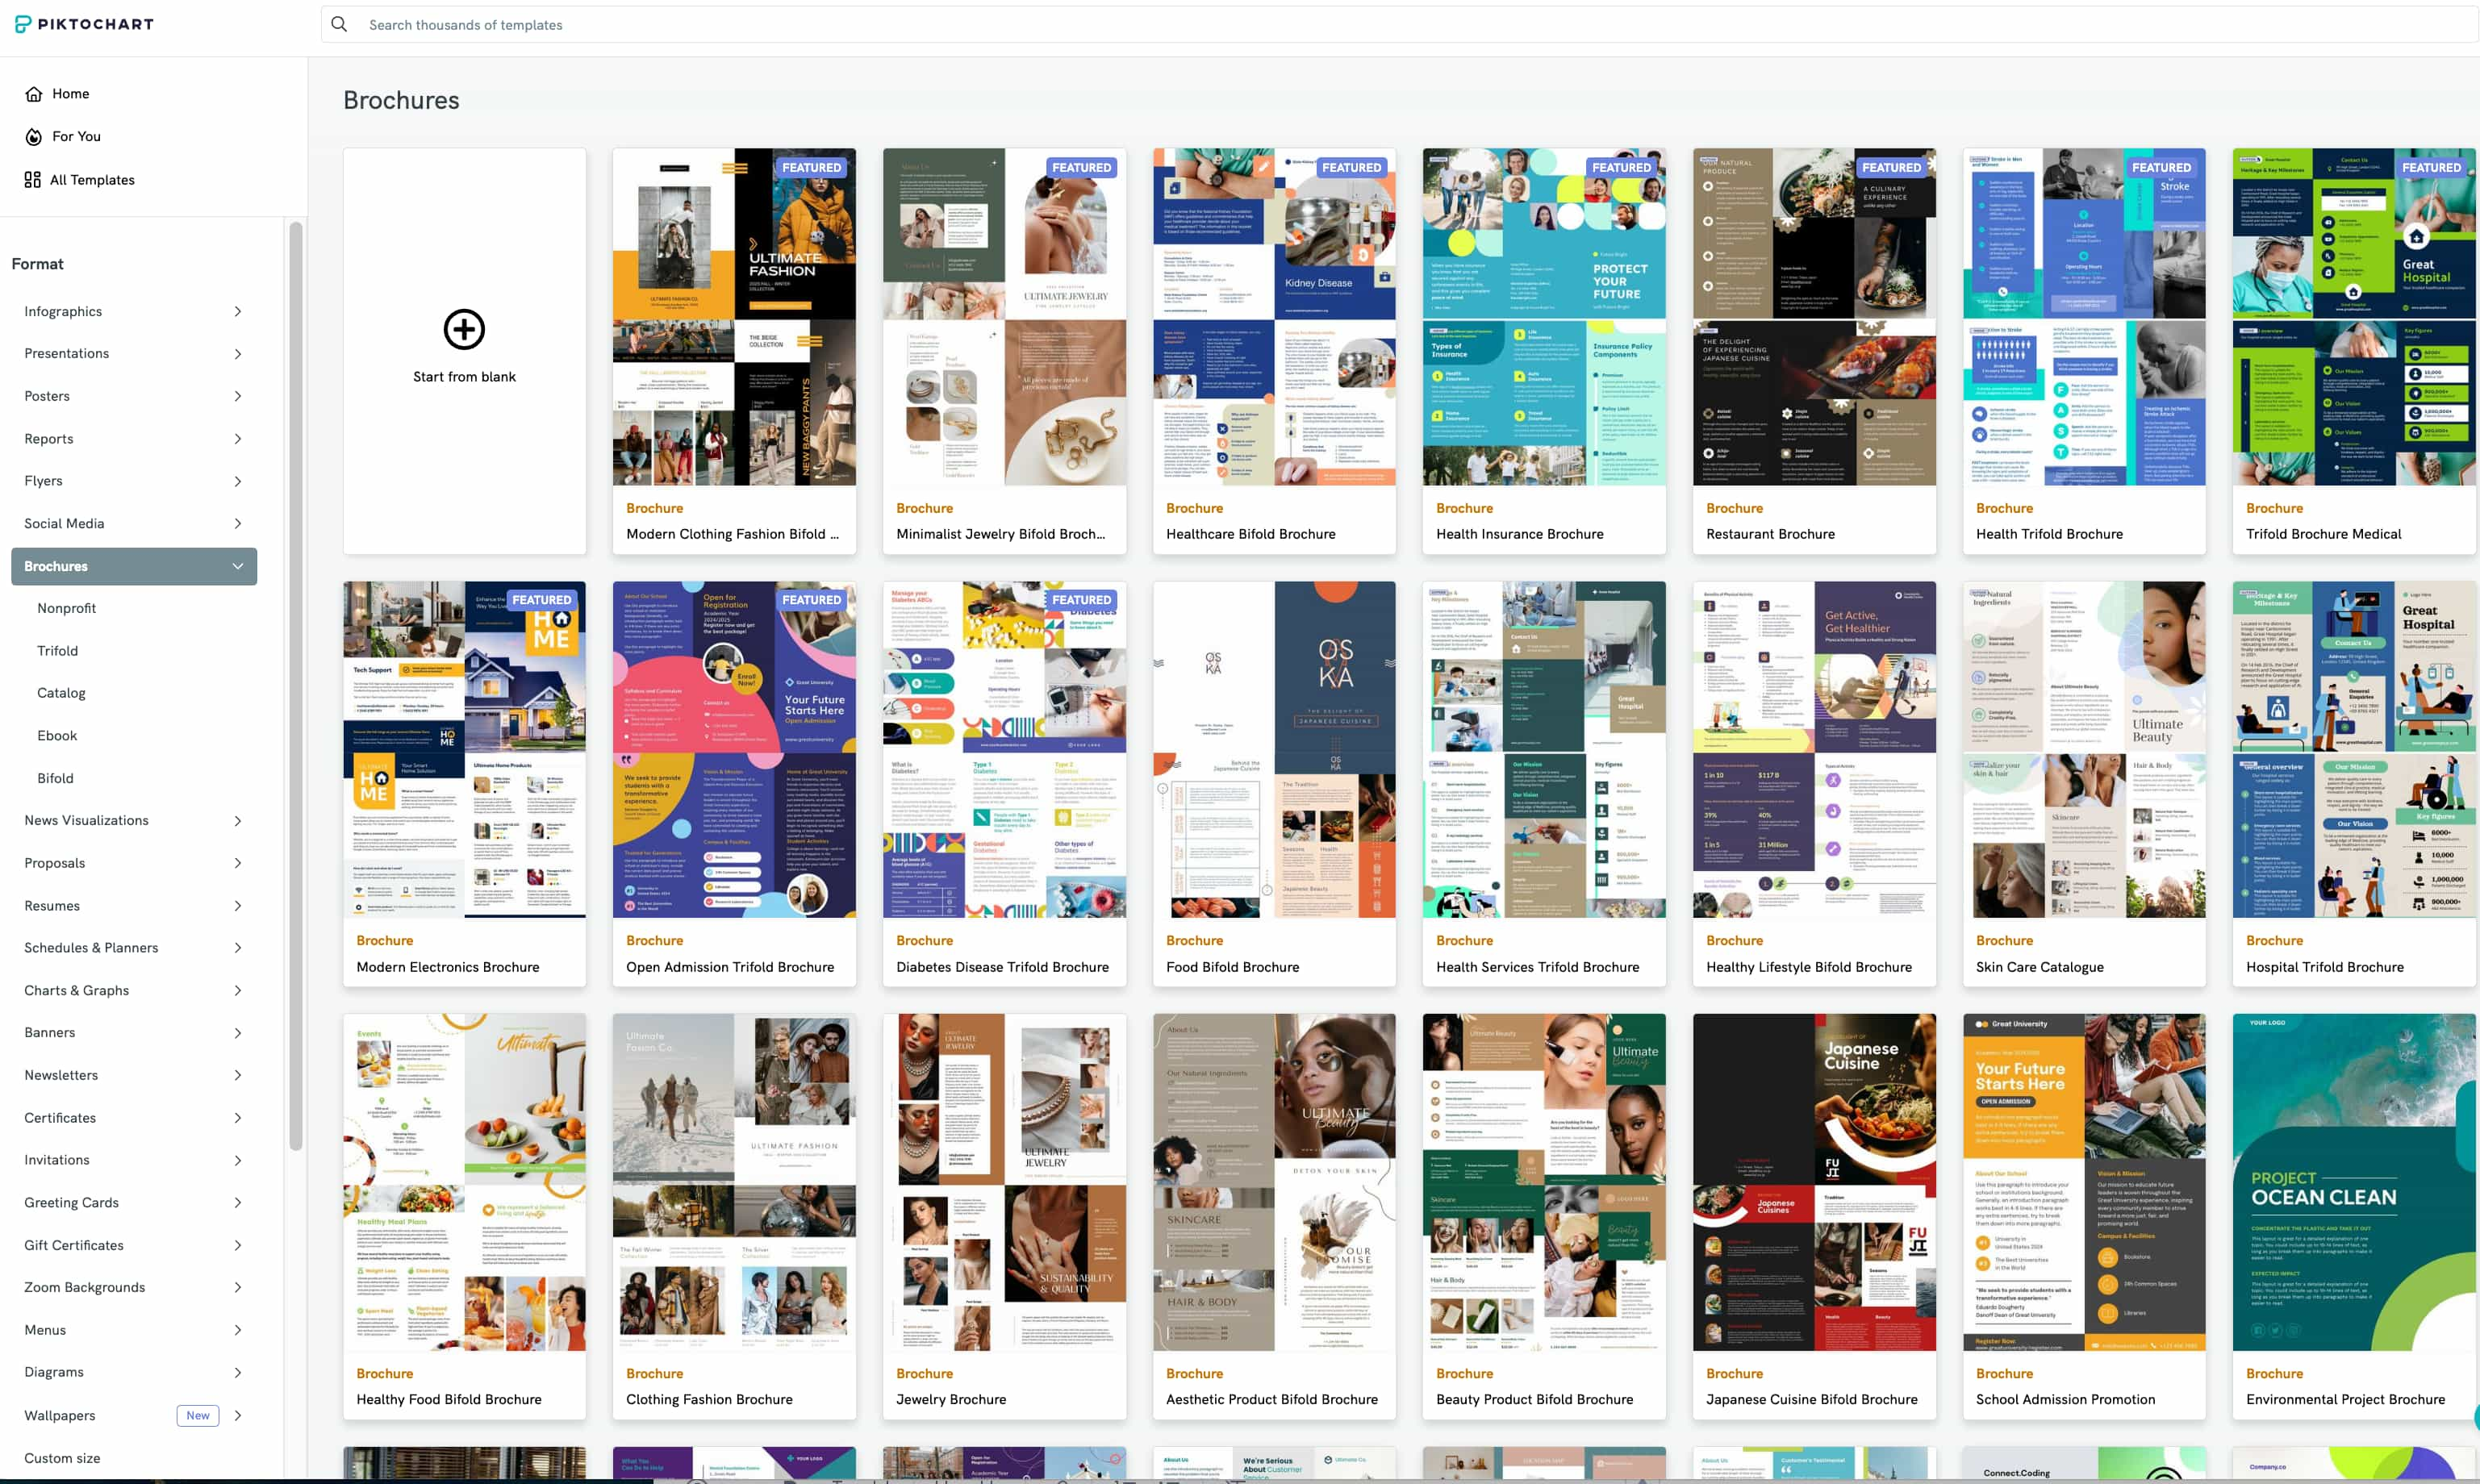 piktochart's brochure library makes it wasy to create and print brochures